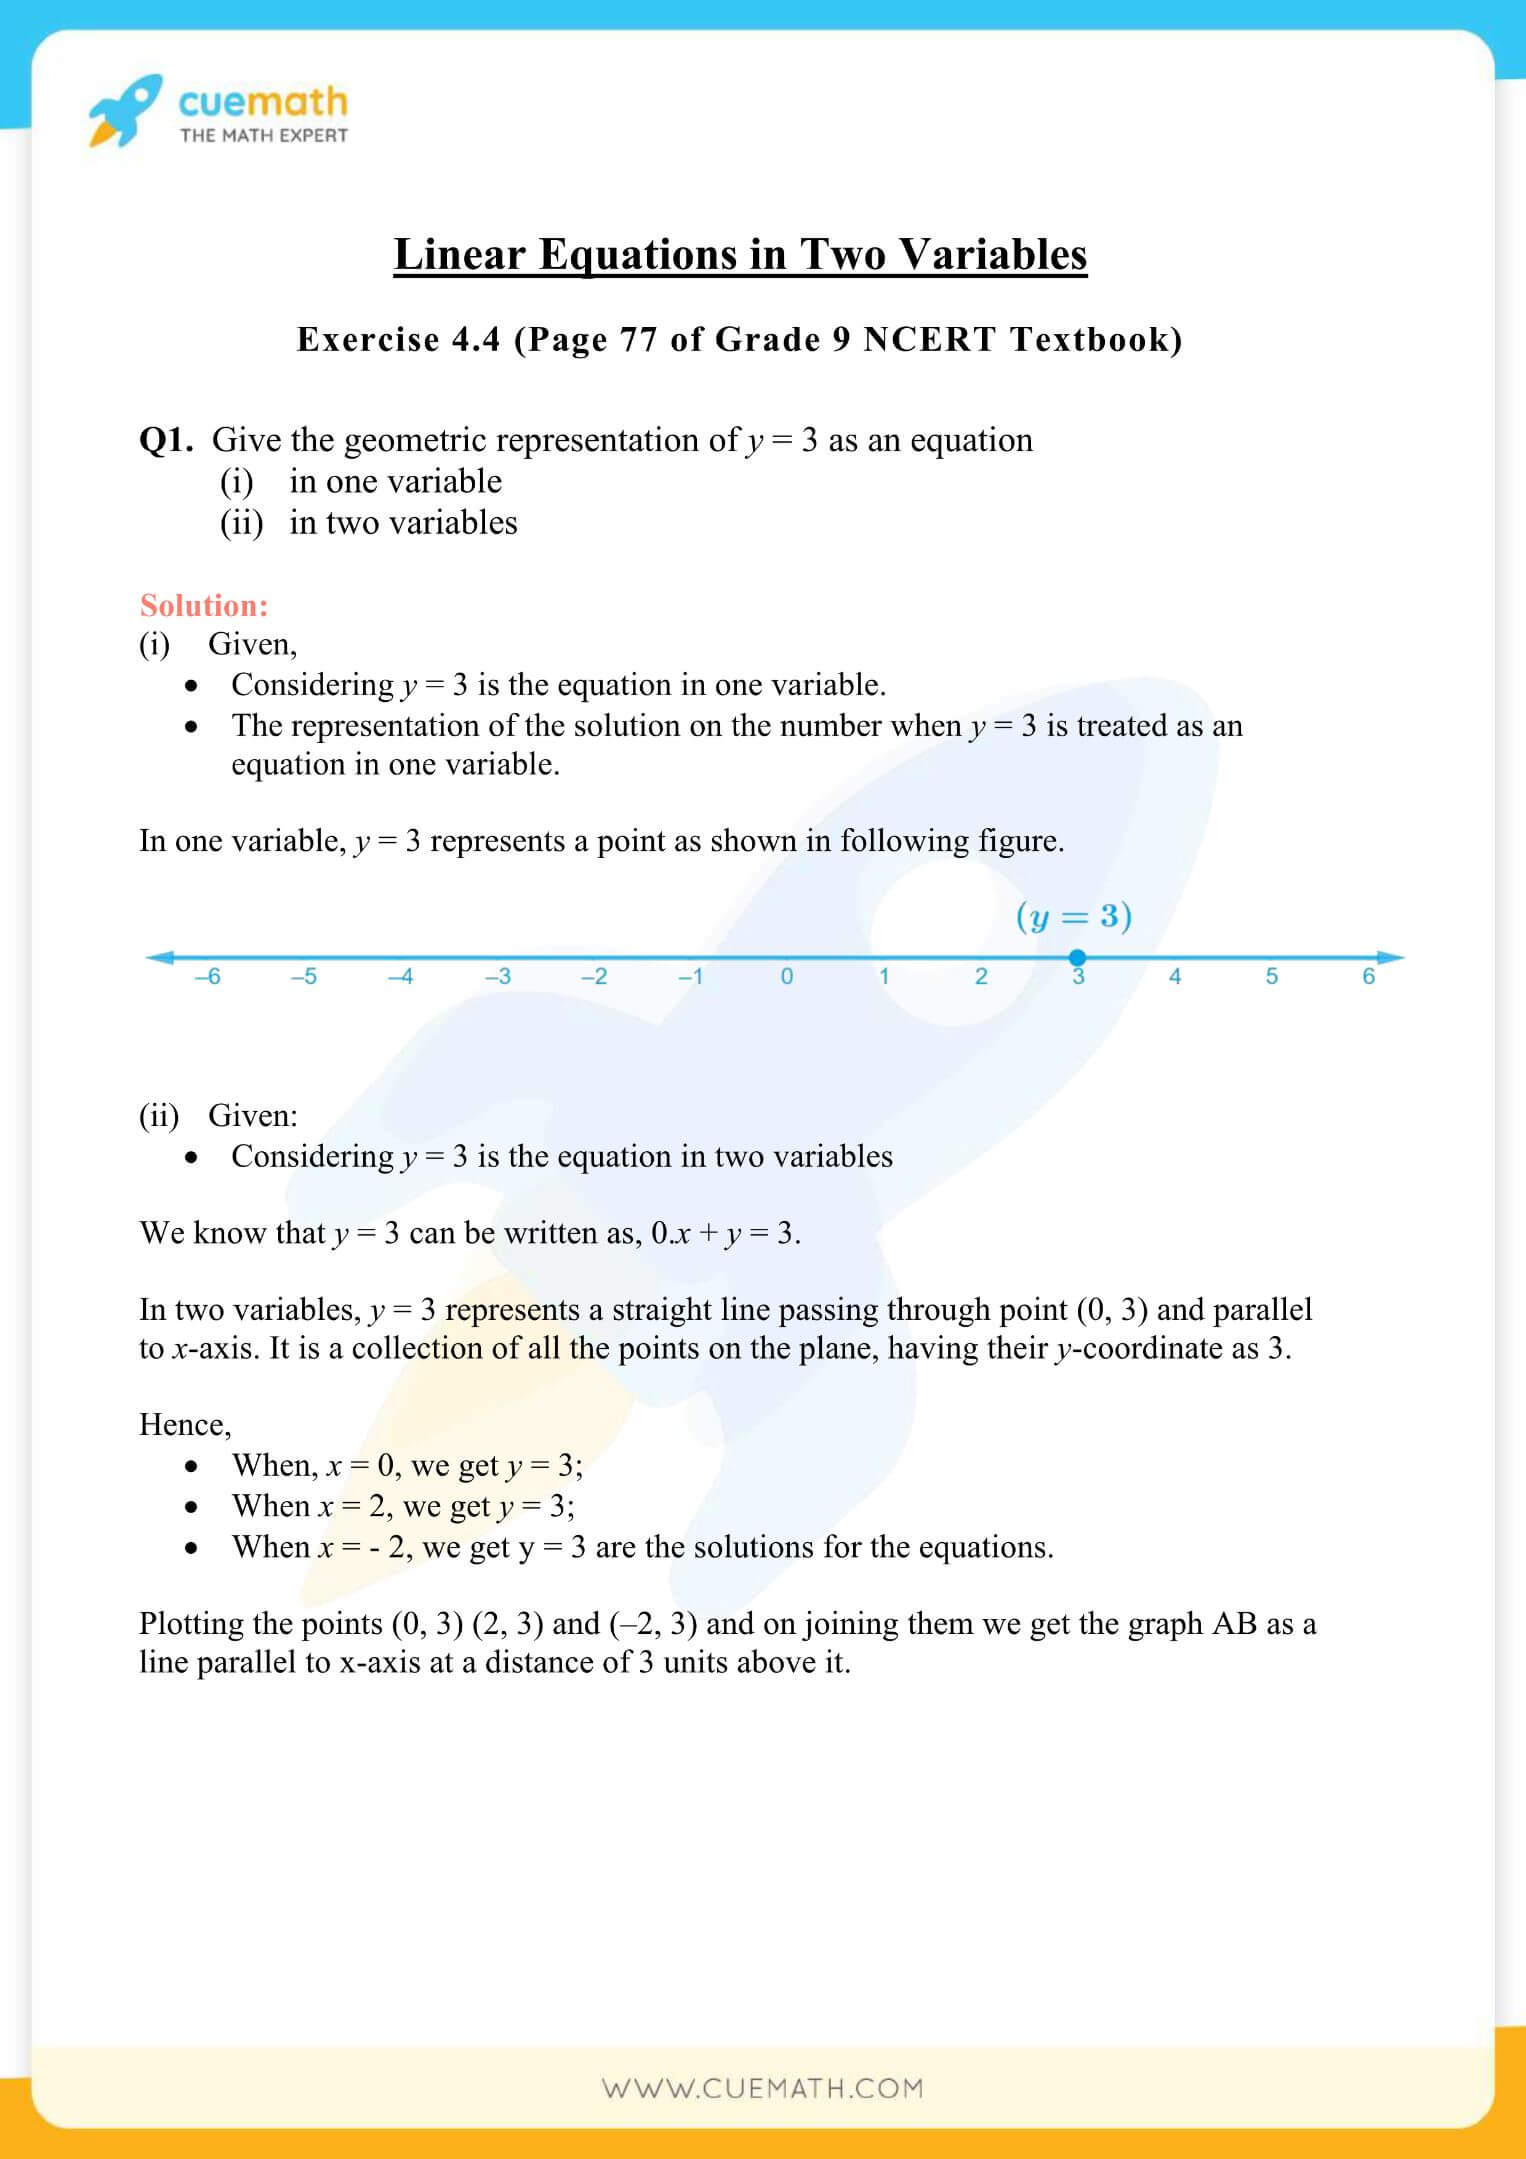 NCERT Solutions Class 9 Math Chapter 4 Linear Equations In Two Variables 26